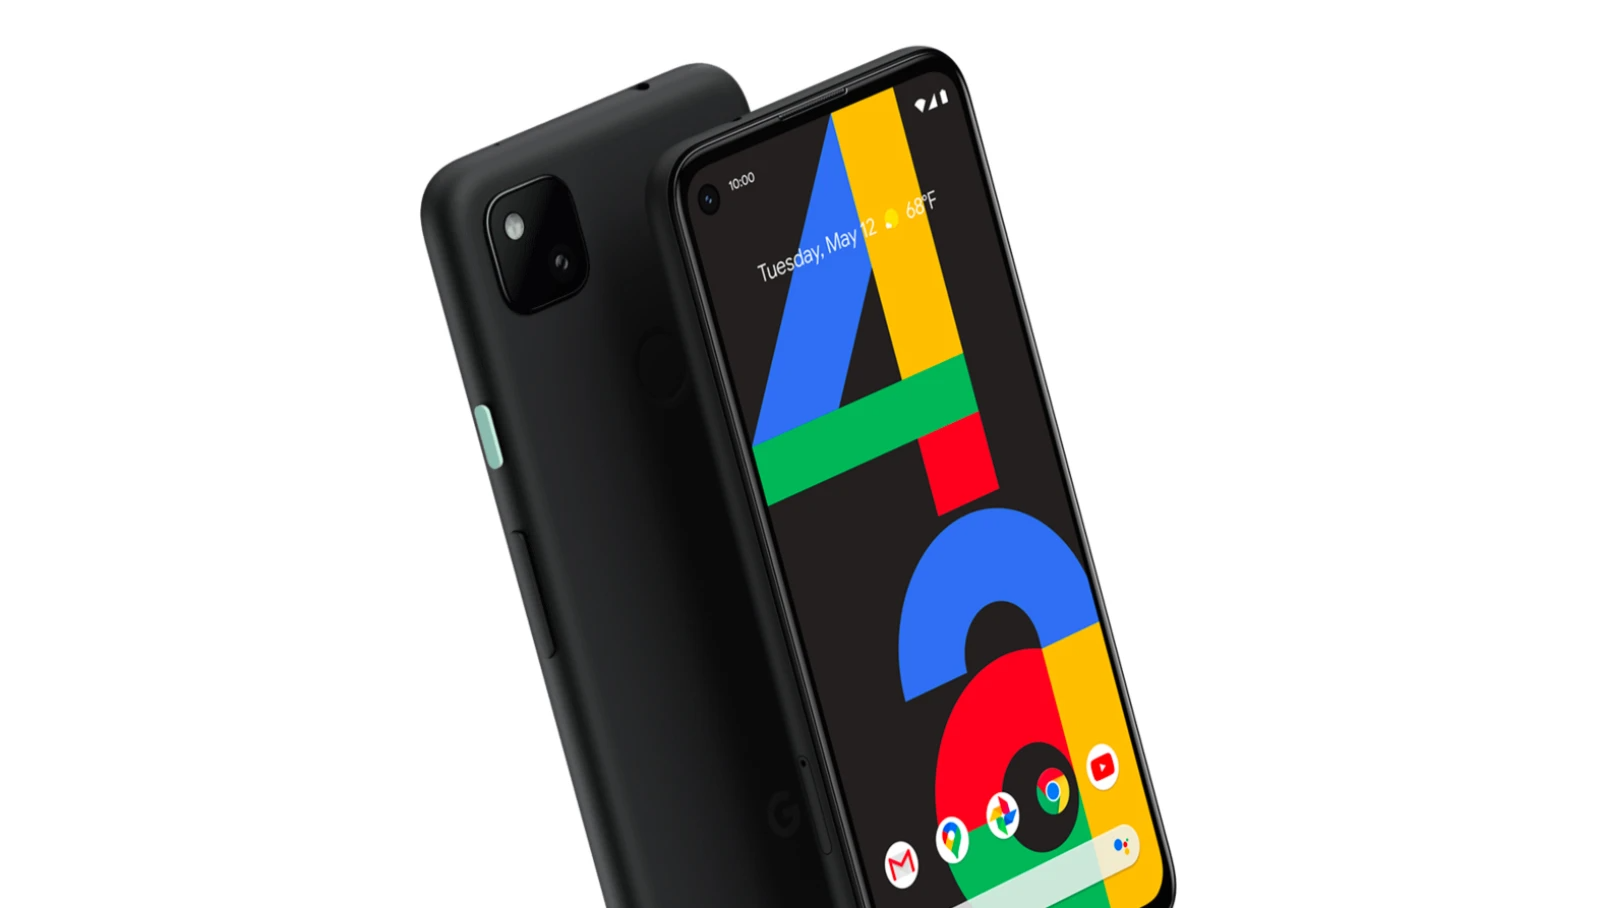 Google Pixel 4A launched - Here are Release Date, Price, Specification and Camera